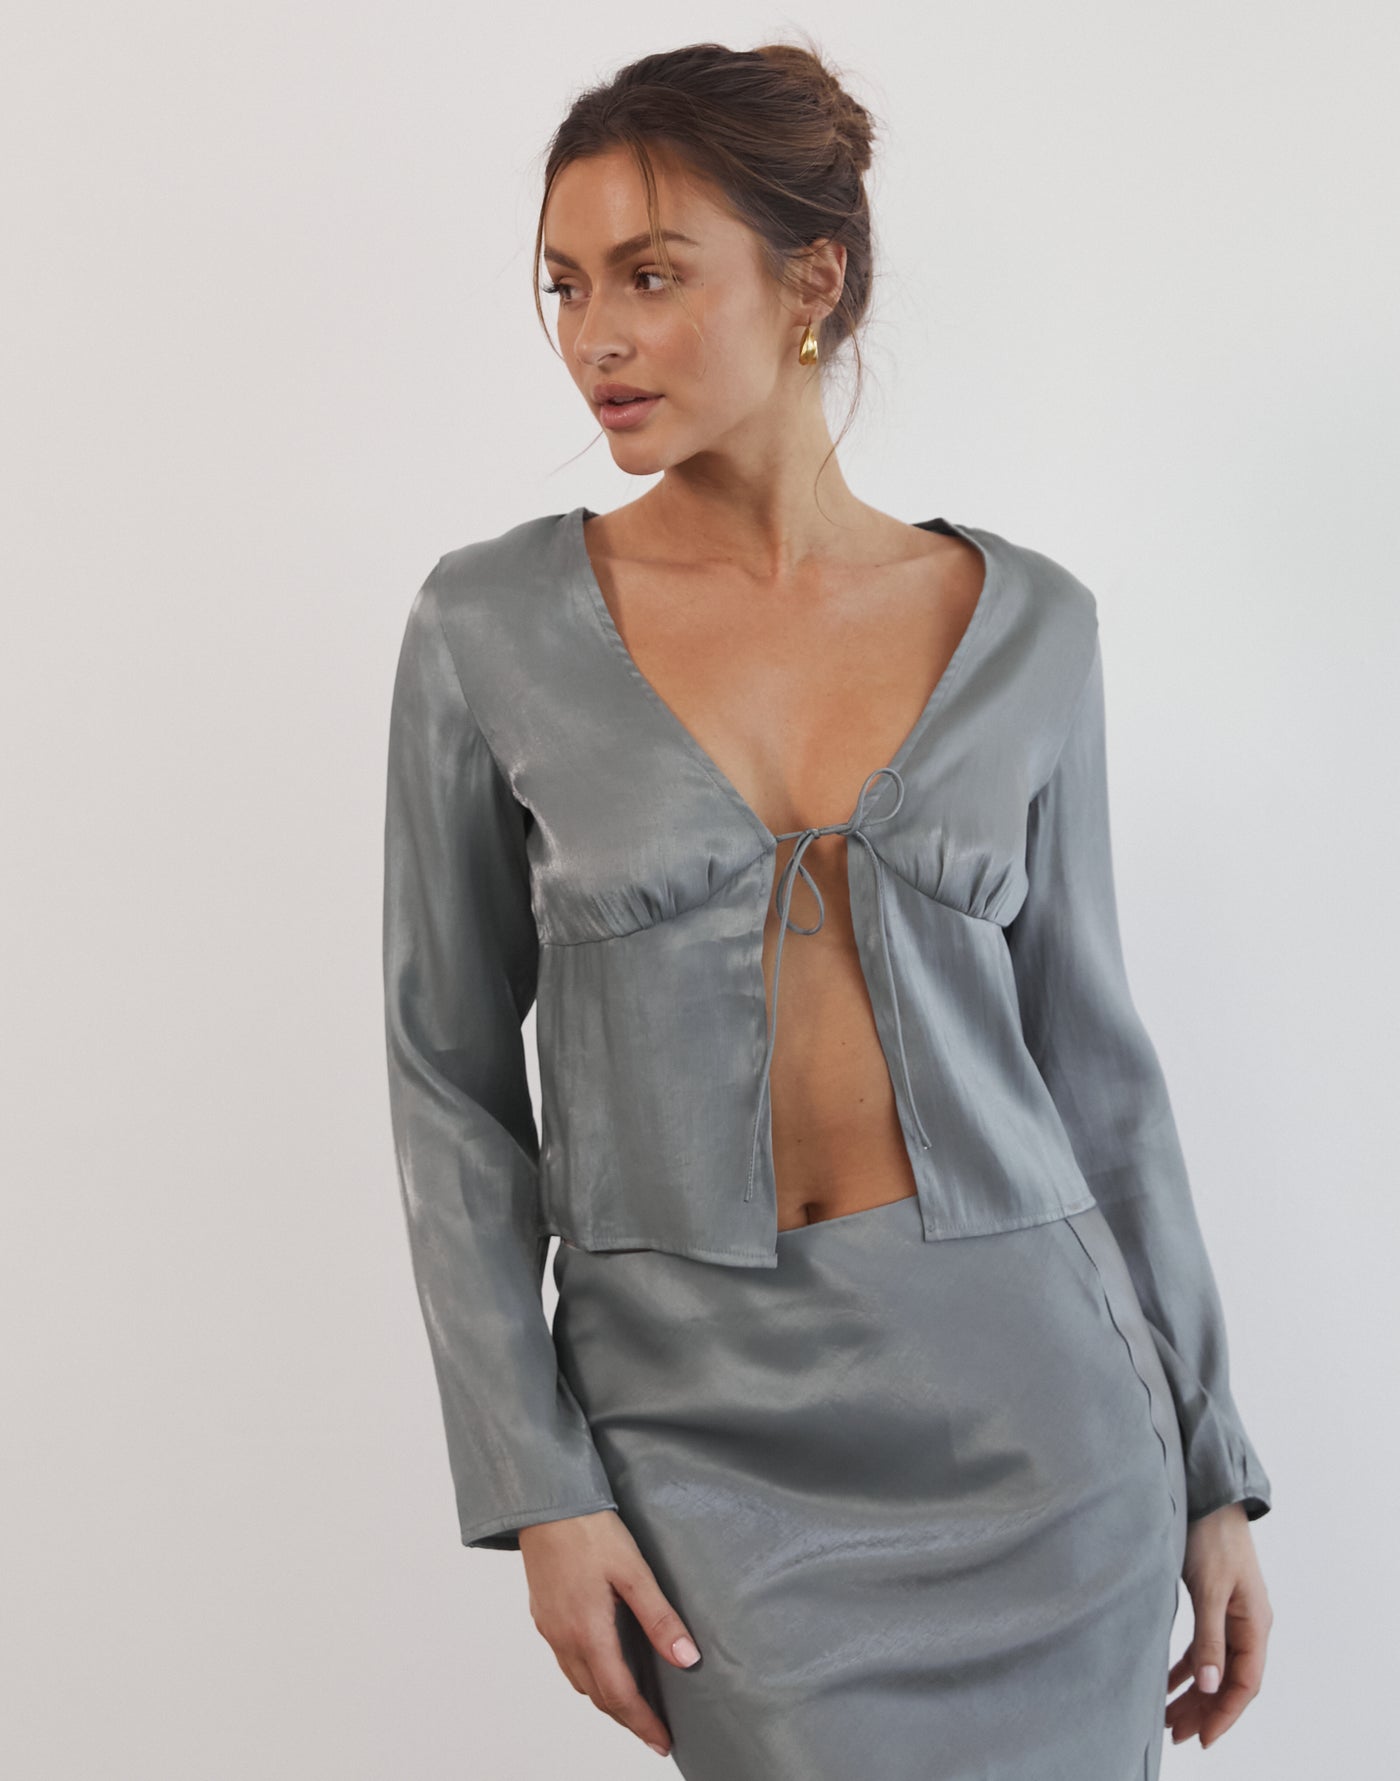 Hannelle Long Sleeve Top (Grey) - Long Sleeve Satin top - Women's Top - Charcoal Clothing